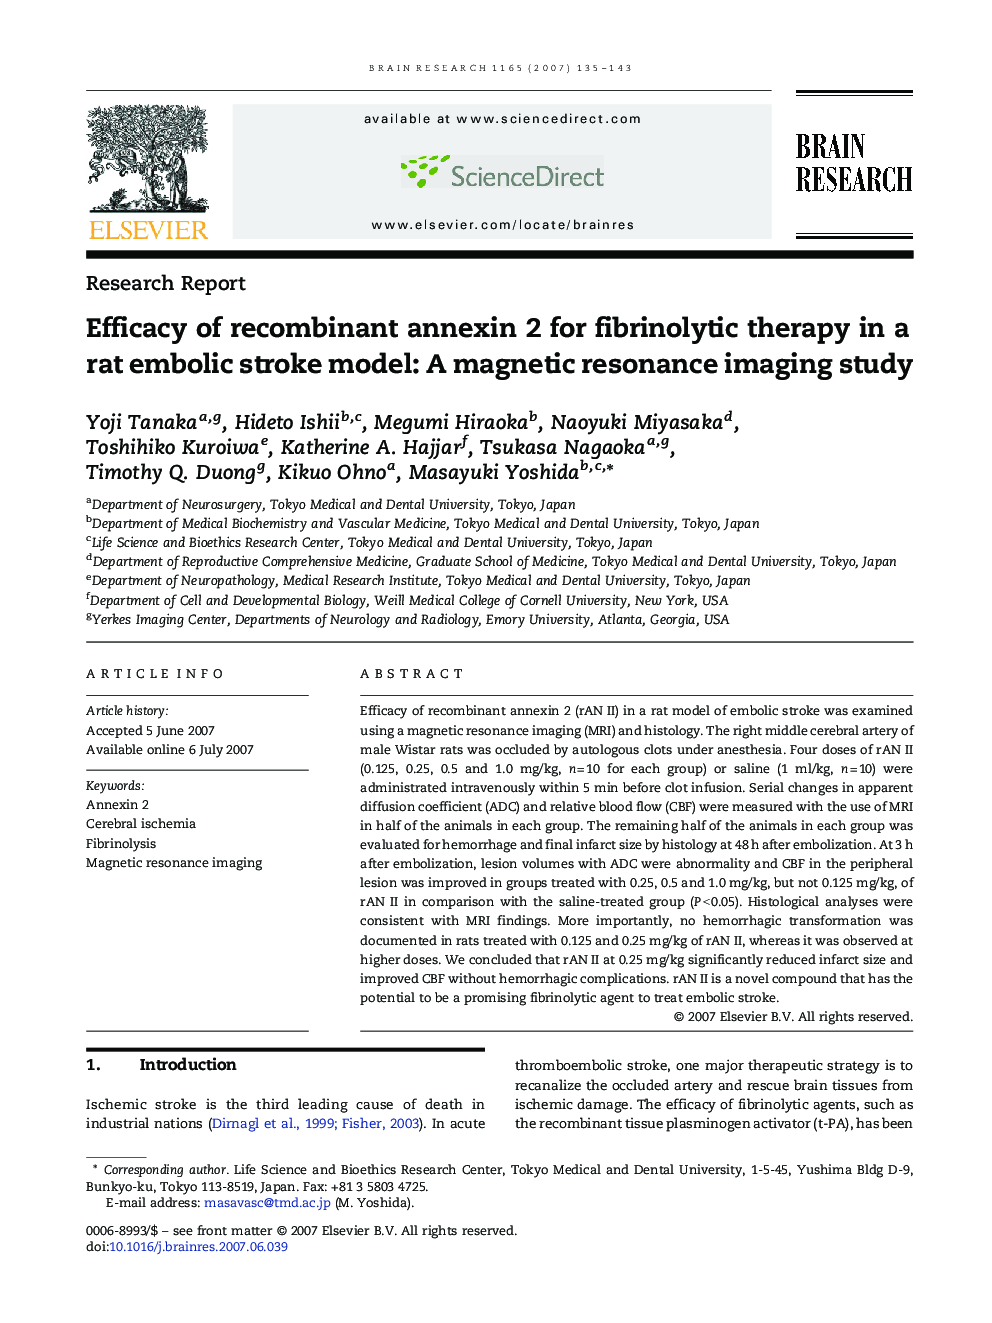 Efficacy of recombinant annexin 2 for fibrinolytic therapy in a rat embolic stroke model: A magnetic resonance imaging study